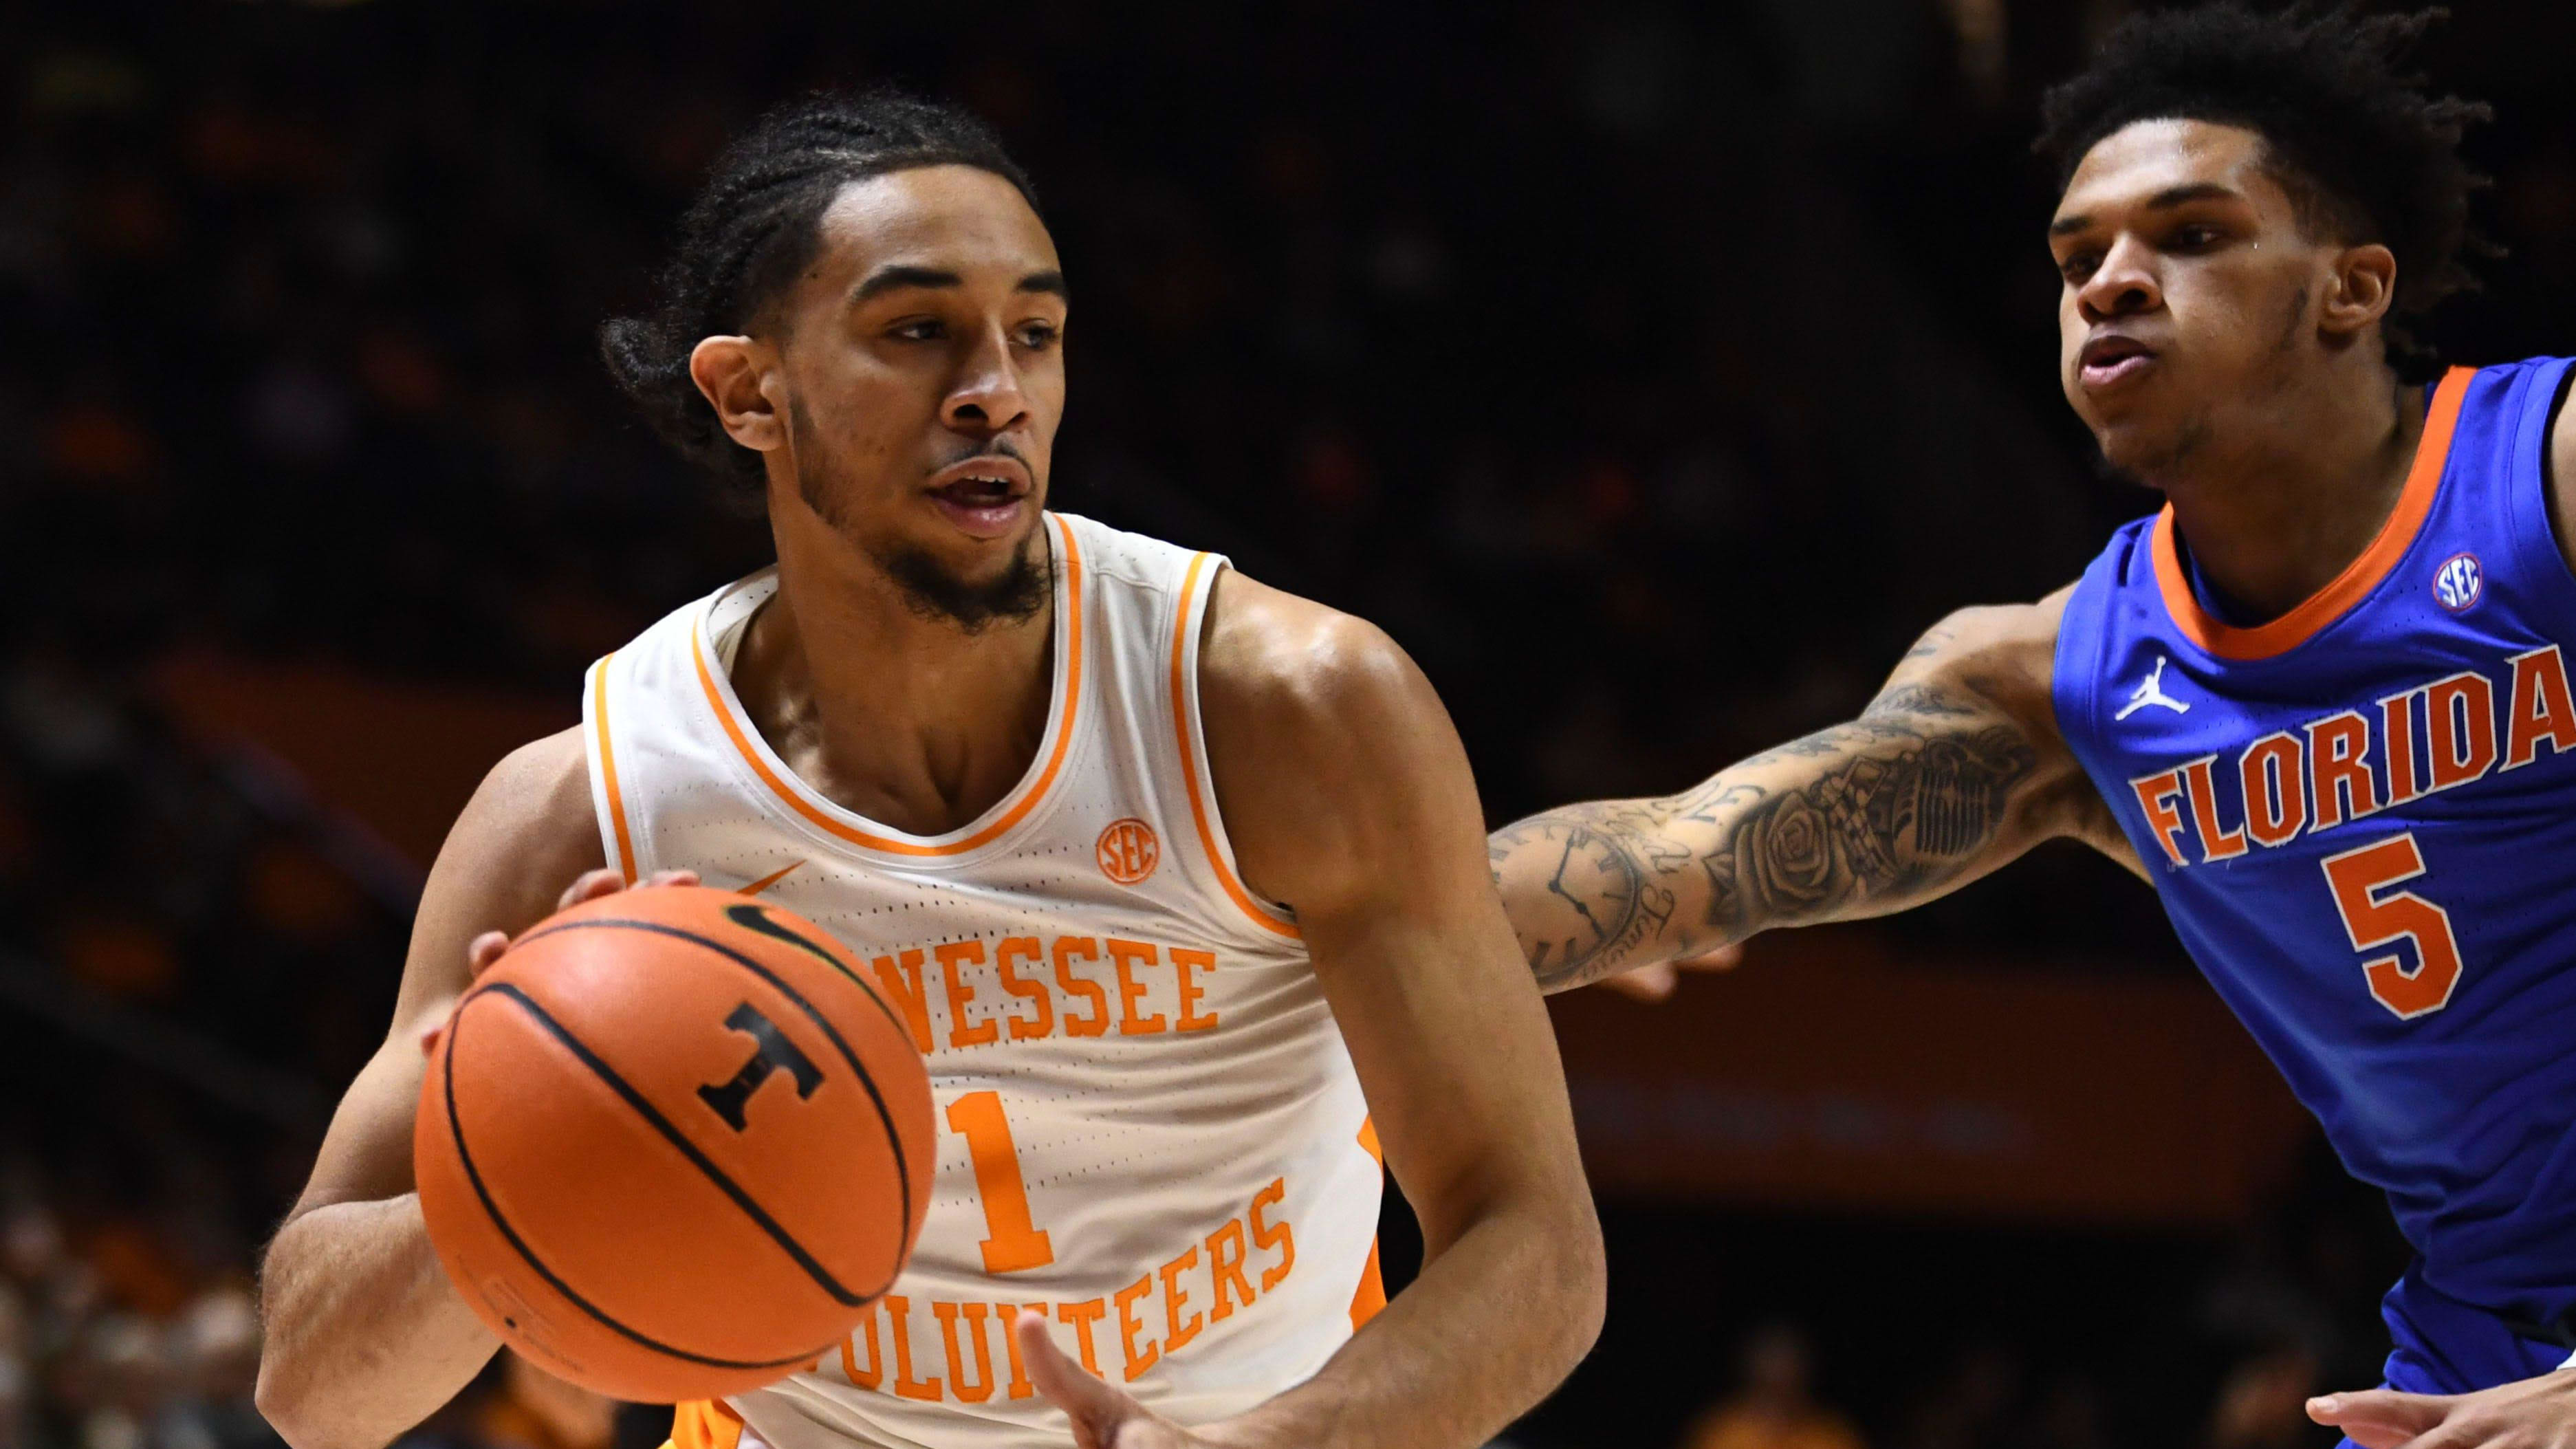 Tennessee Guard Freddie Dilione Announces Transfer to Penn State